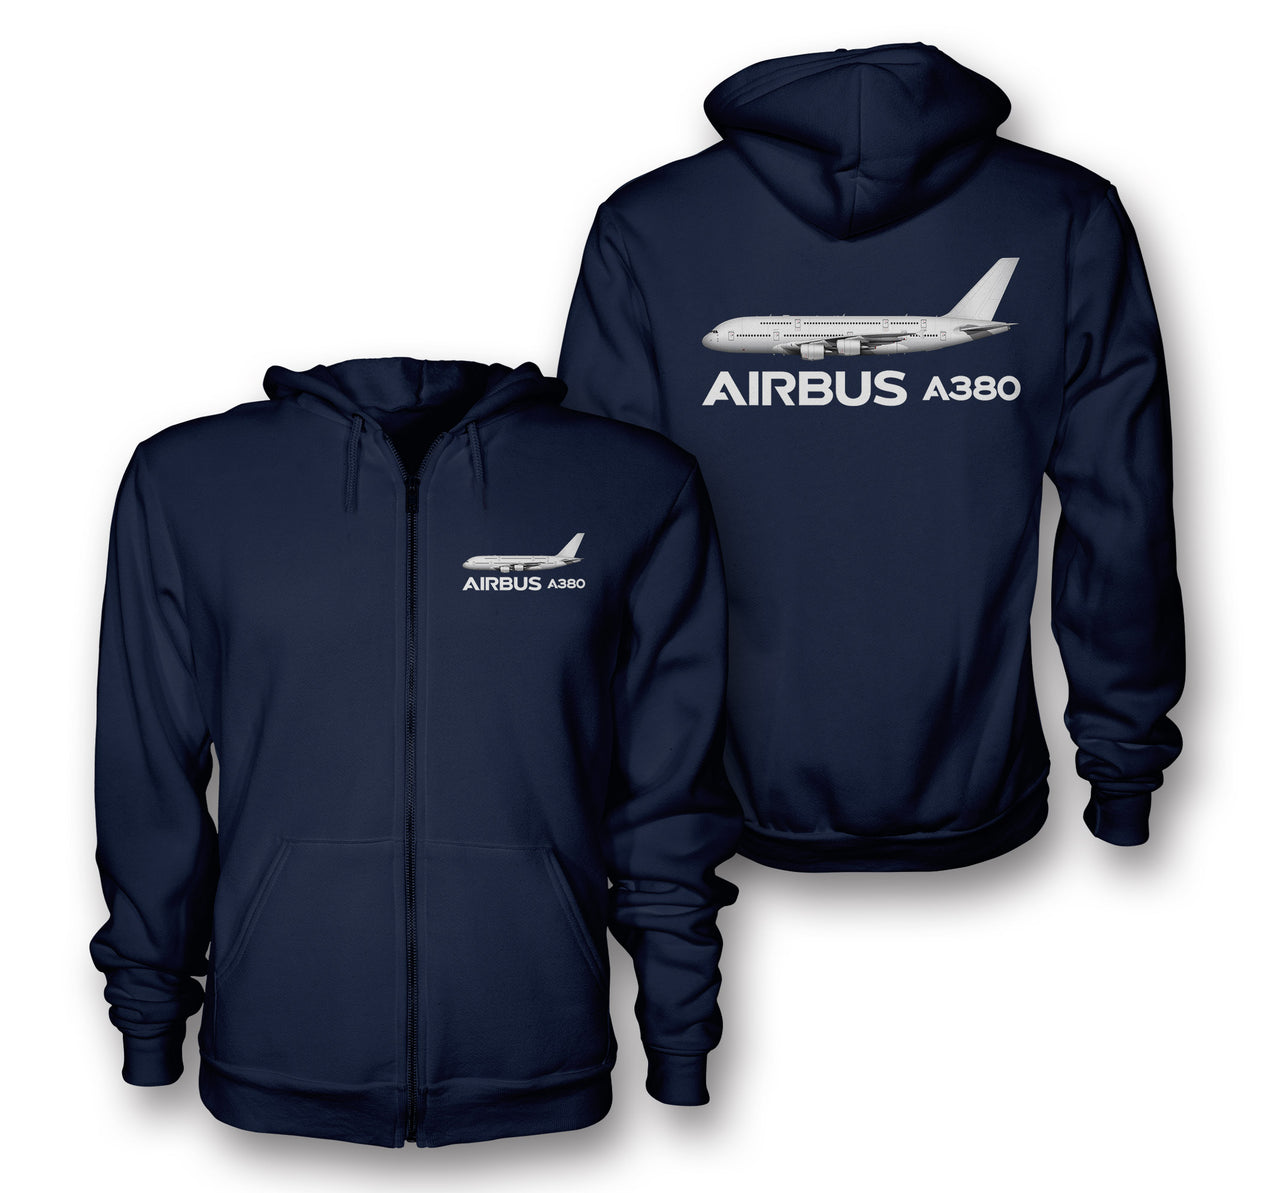 The Airbus A380 Designed Zipped Hoodies